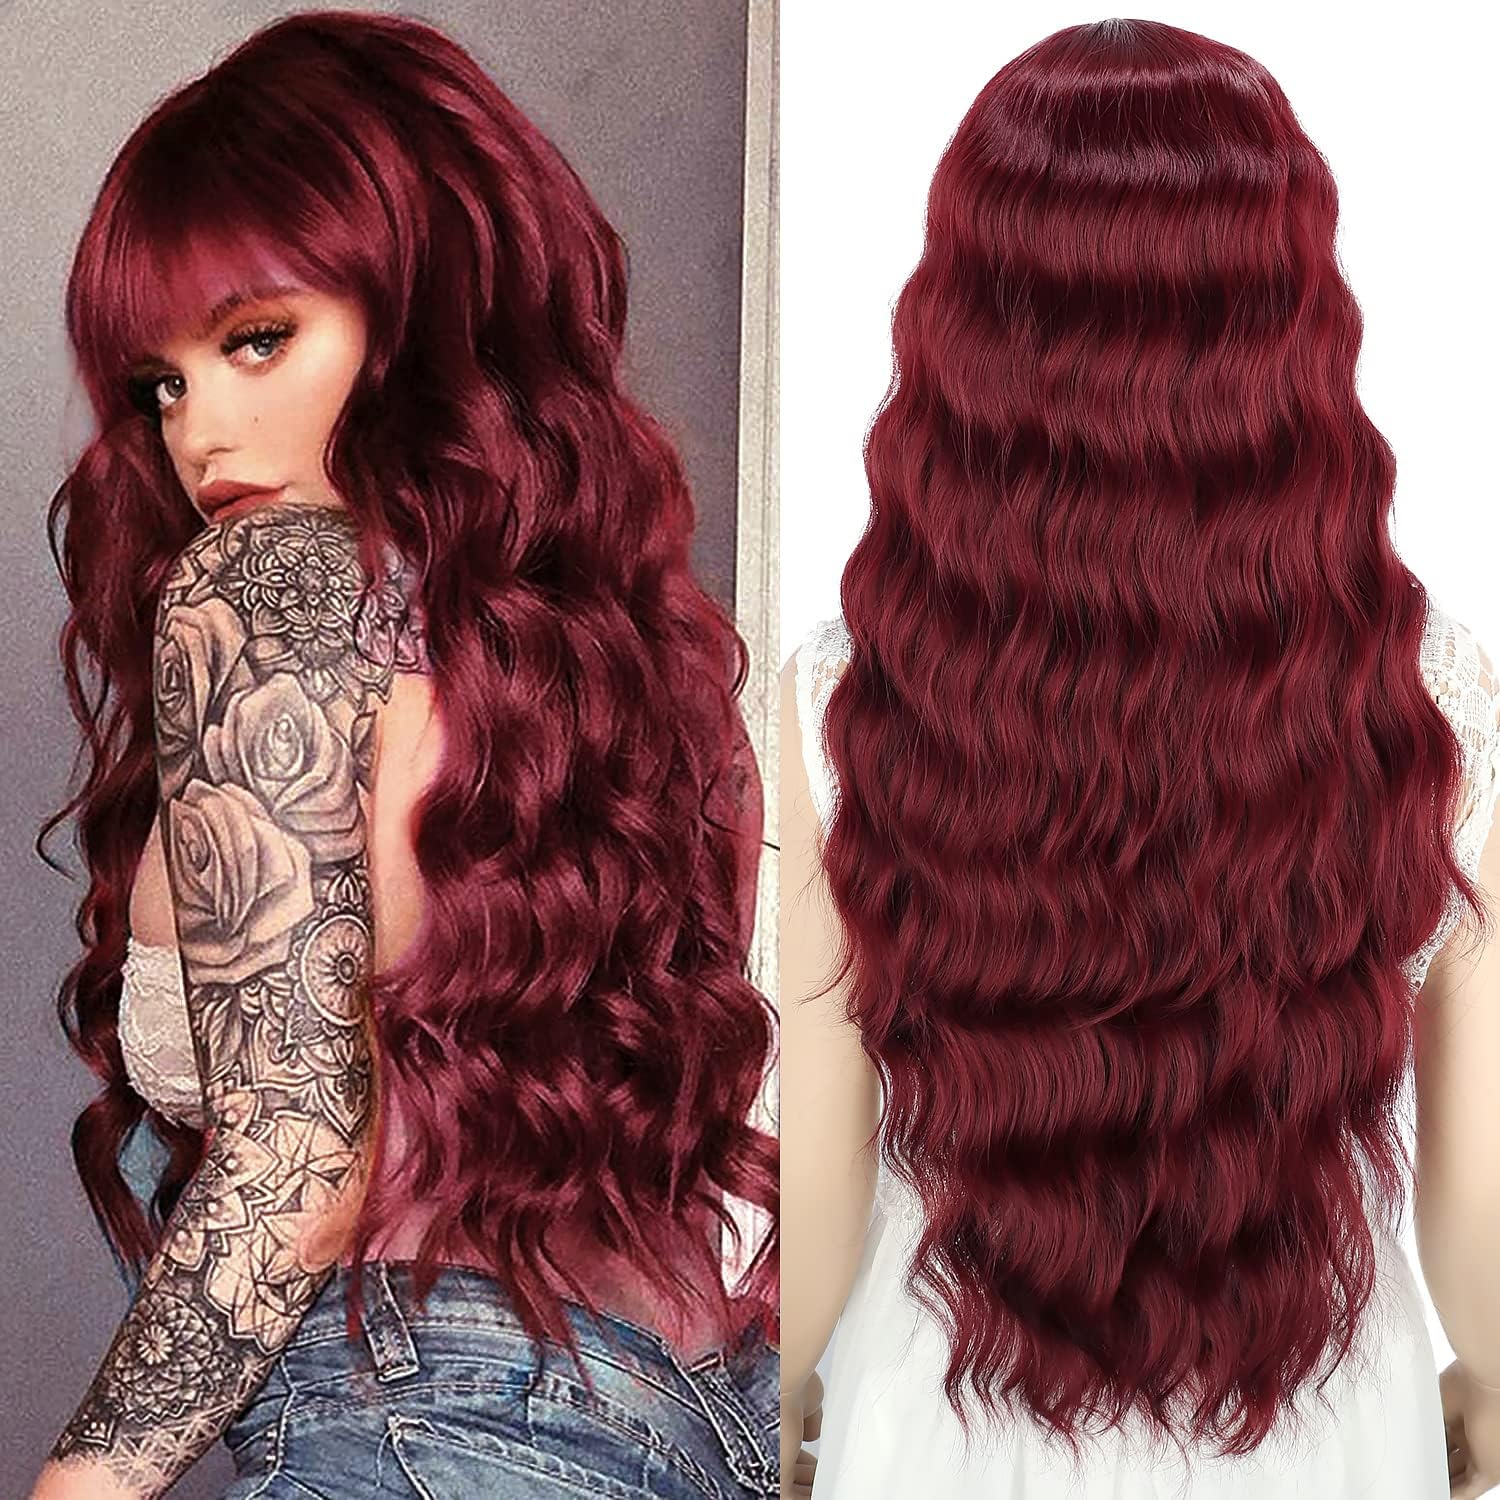 YEESHEDO Long Curly Wine Red Wig with Bangs for Women, Synthetic Brazilian Natur